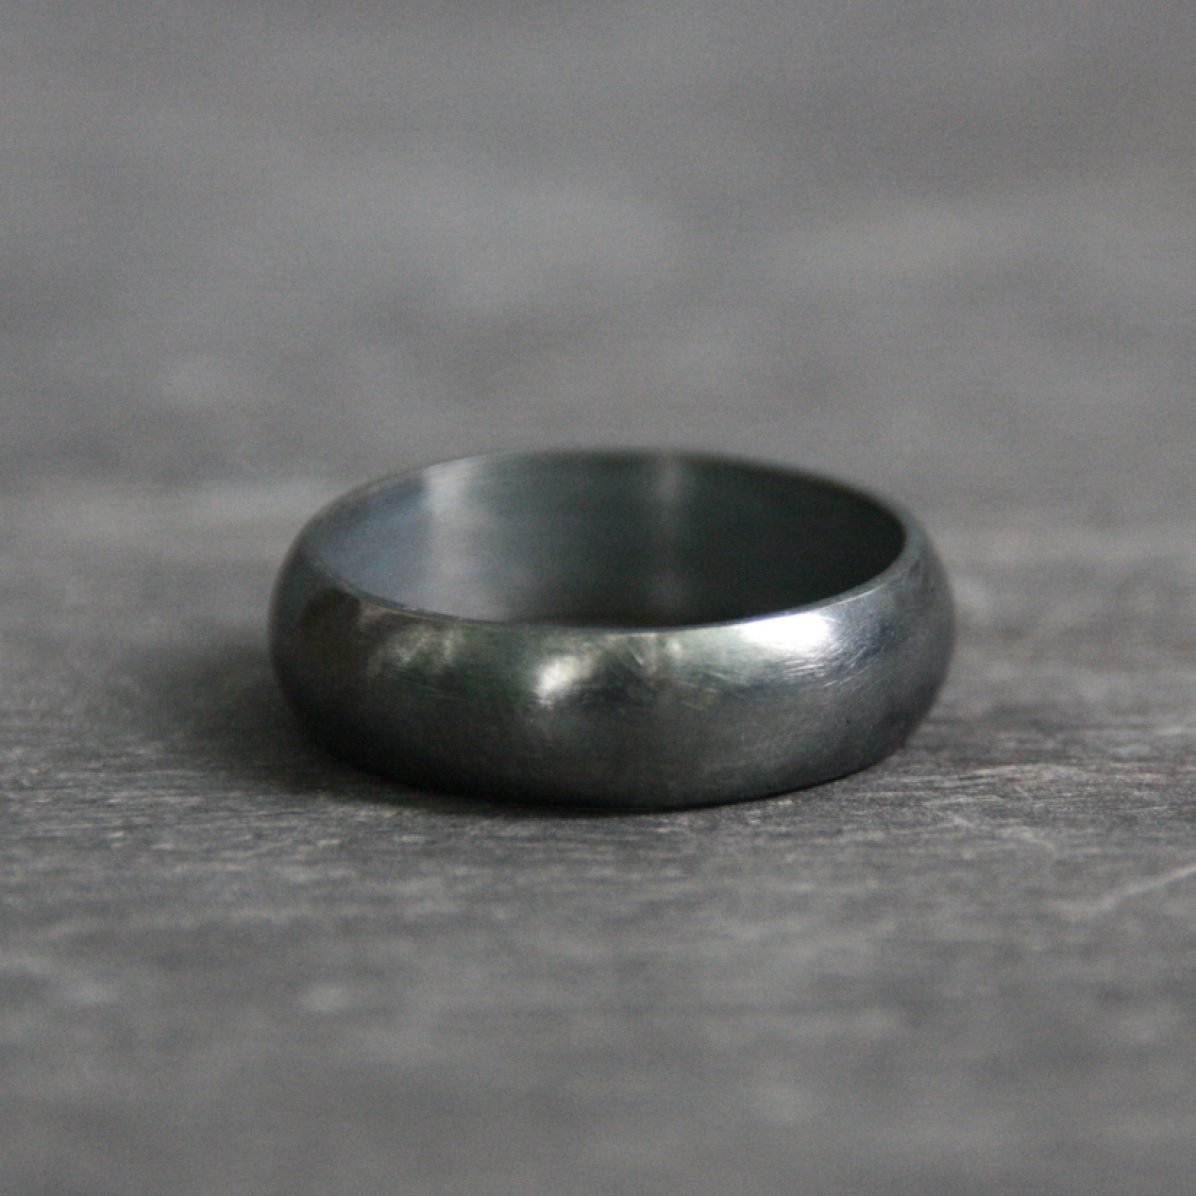 jewelry, ring, men's ring, sterling silver, oxidized silver